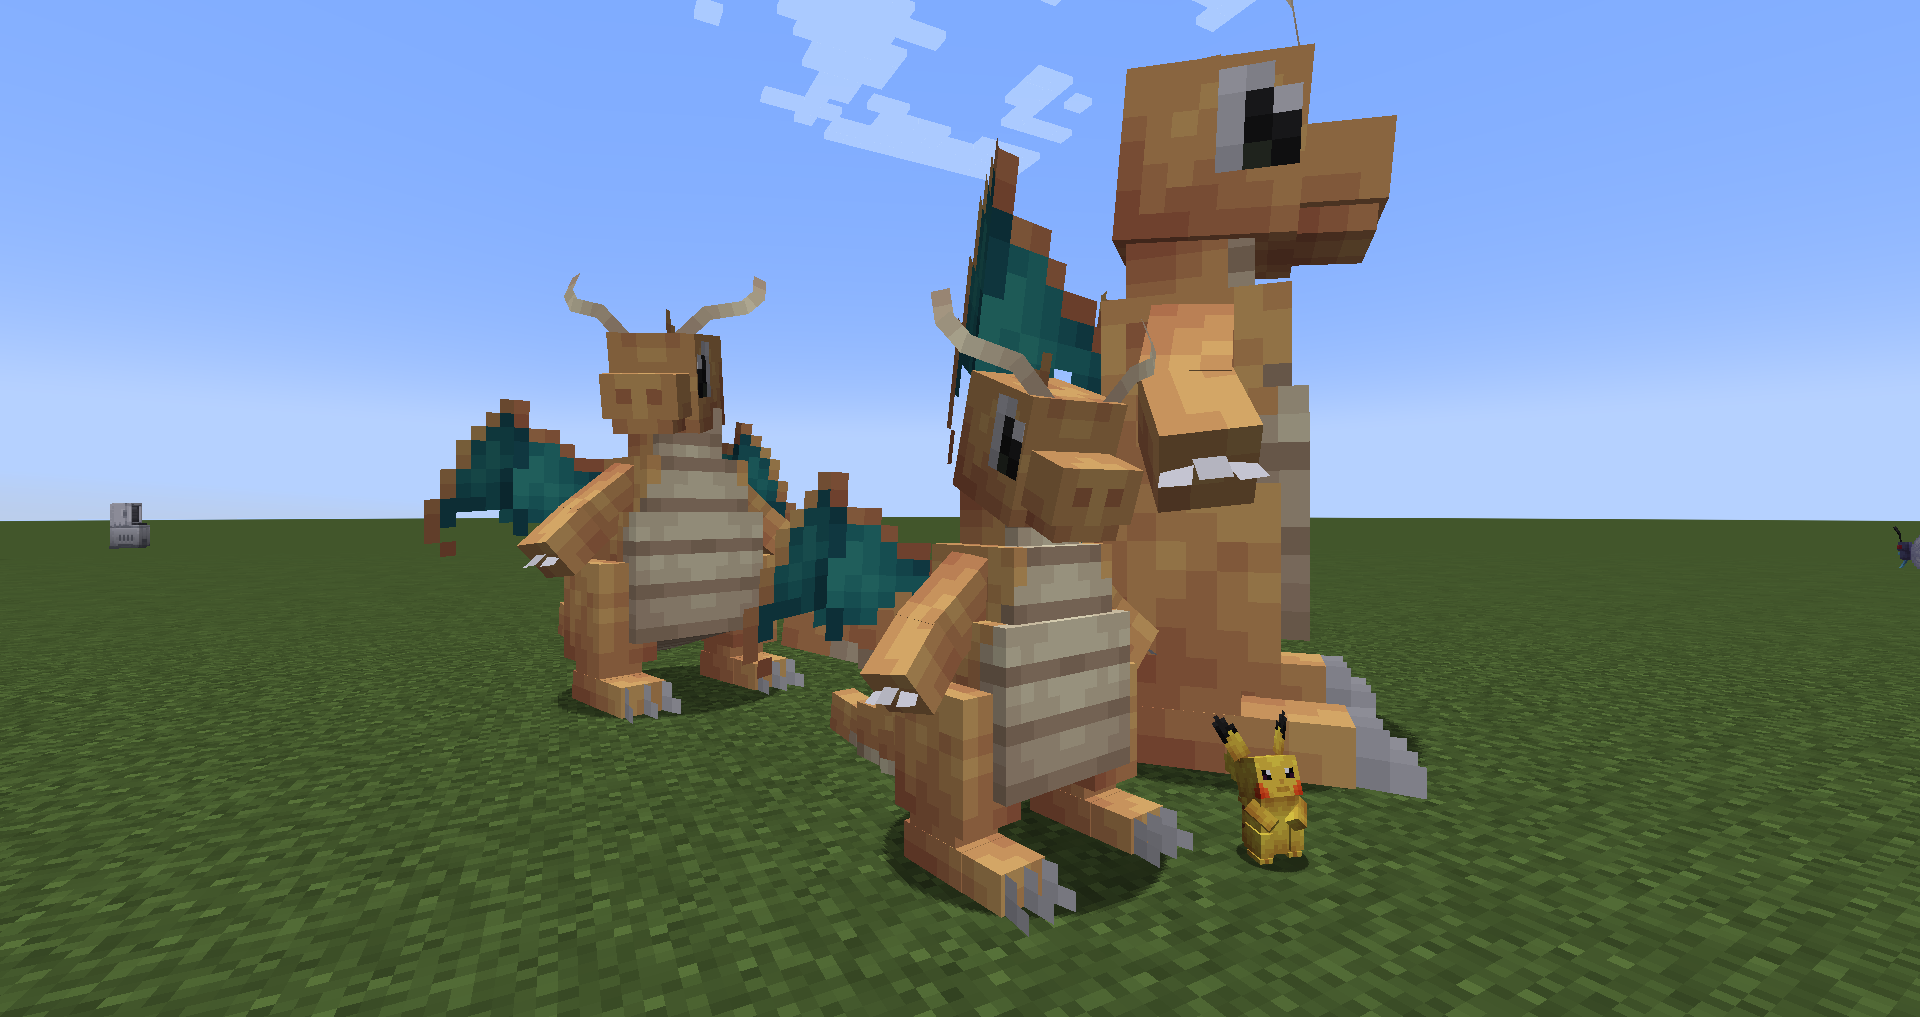 Small, Normal, and Large sized Dragonite